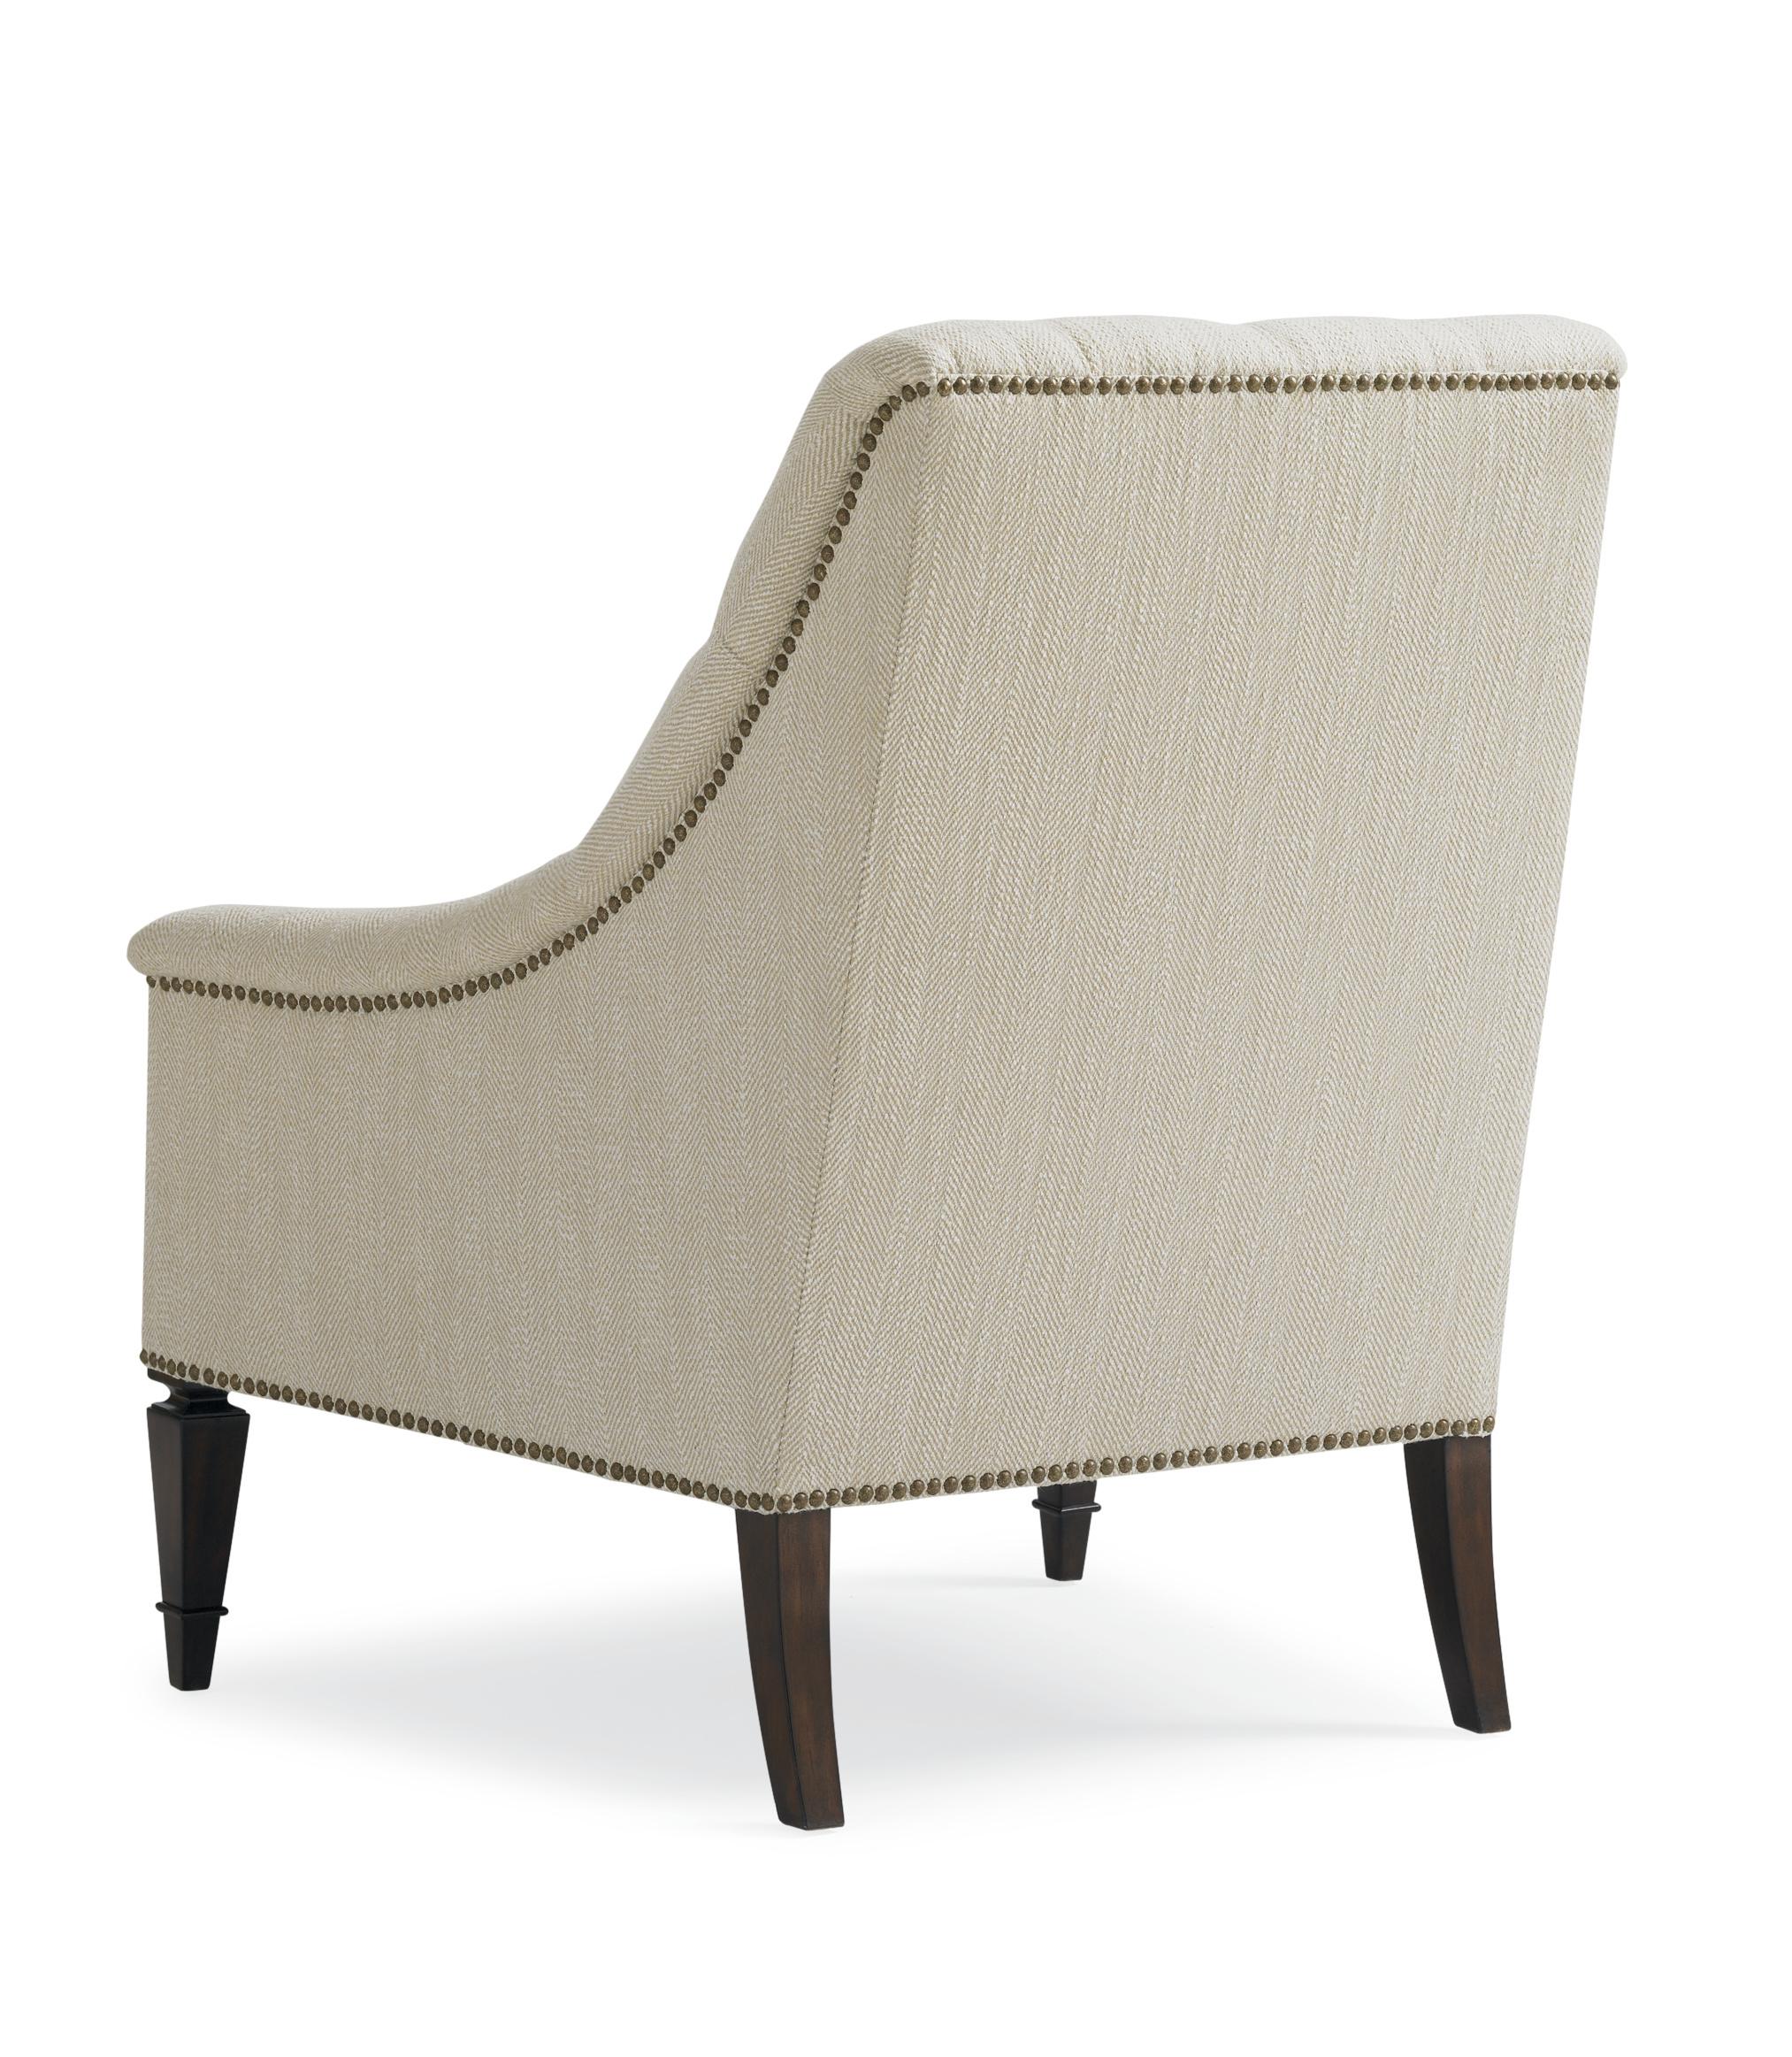 

    
Button-Tufted Natural Textured Herringbone Fabric Chair CLASSIC ELEGANCE by Caracole
